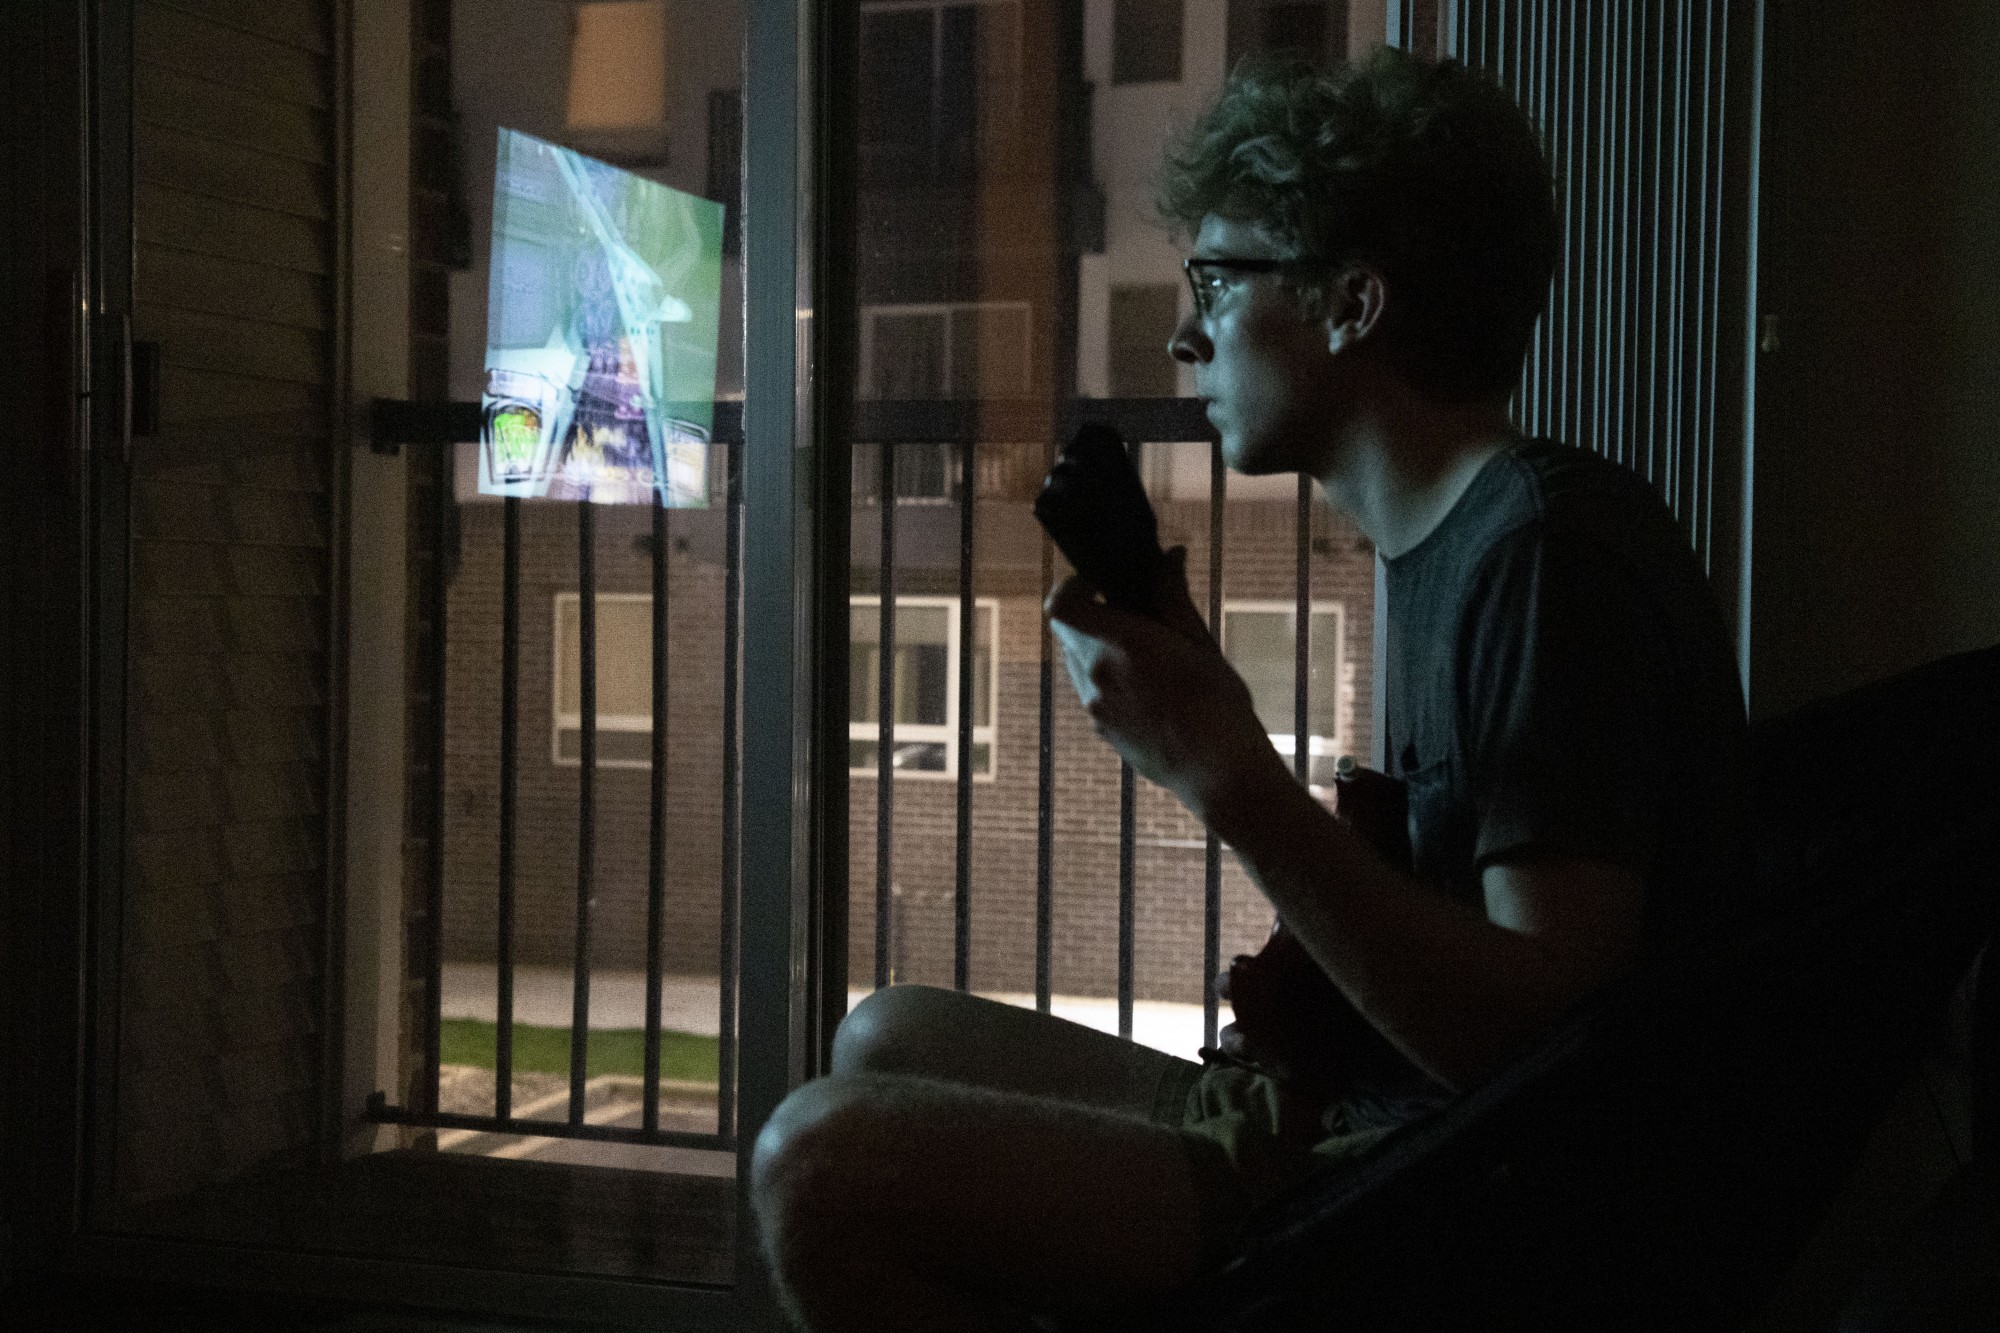 9:17 p.m.
Sophomore Jake Moe spends time practicing Guitar Hero on expert mode in his apartment at the University Commons. Moe’s roommates moved out once classes transitioned online, so he lives alone. Moe can spend hours playing and has become “the second best person he knows.”